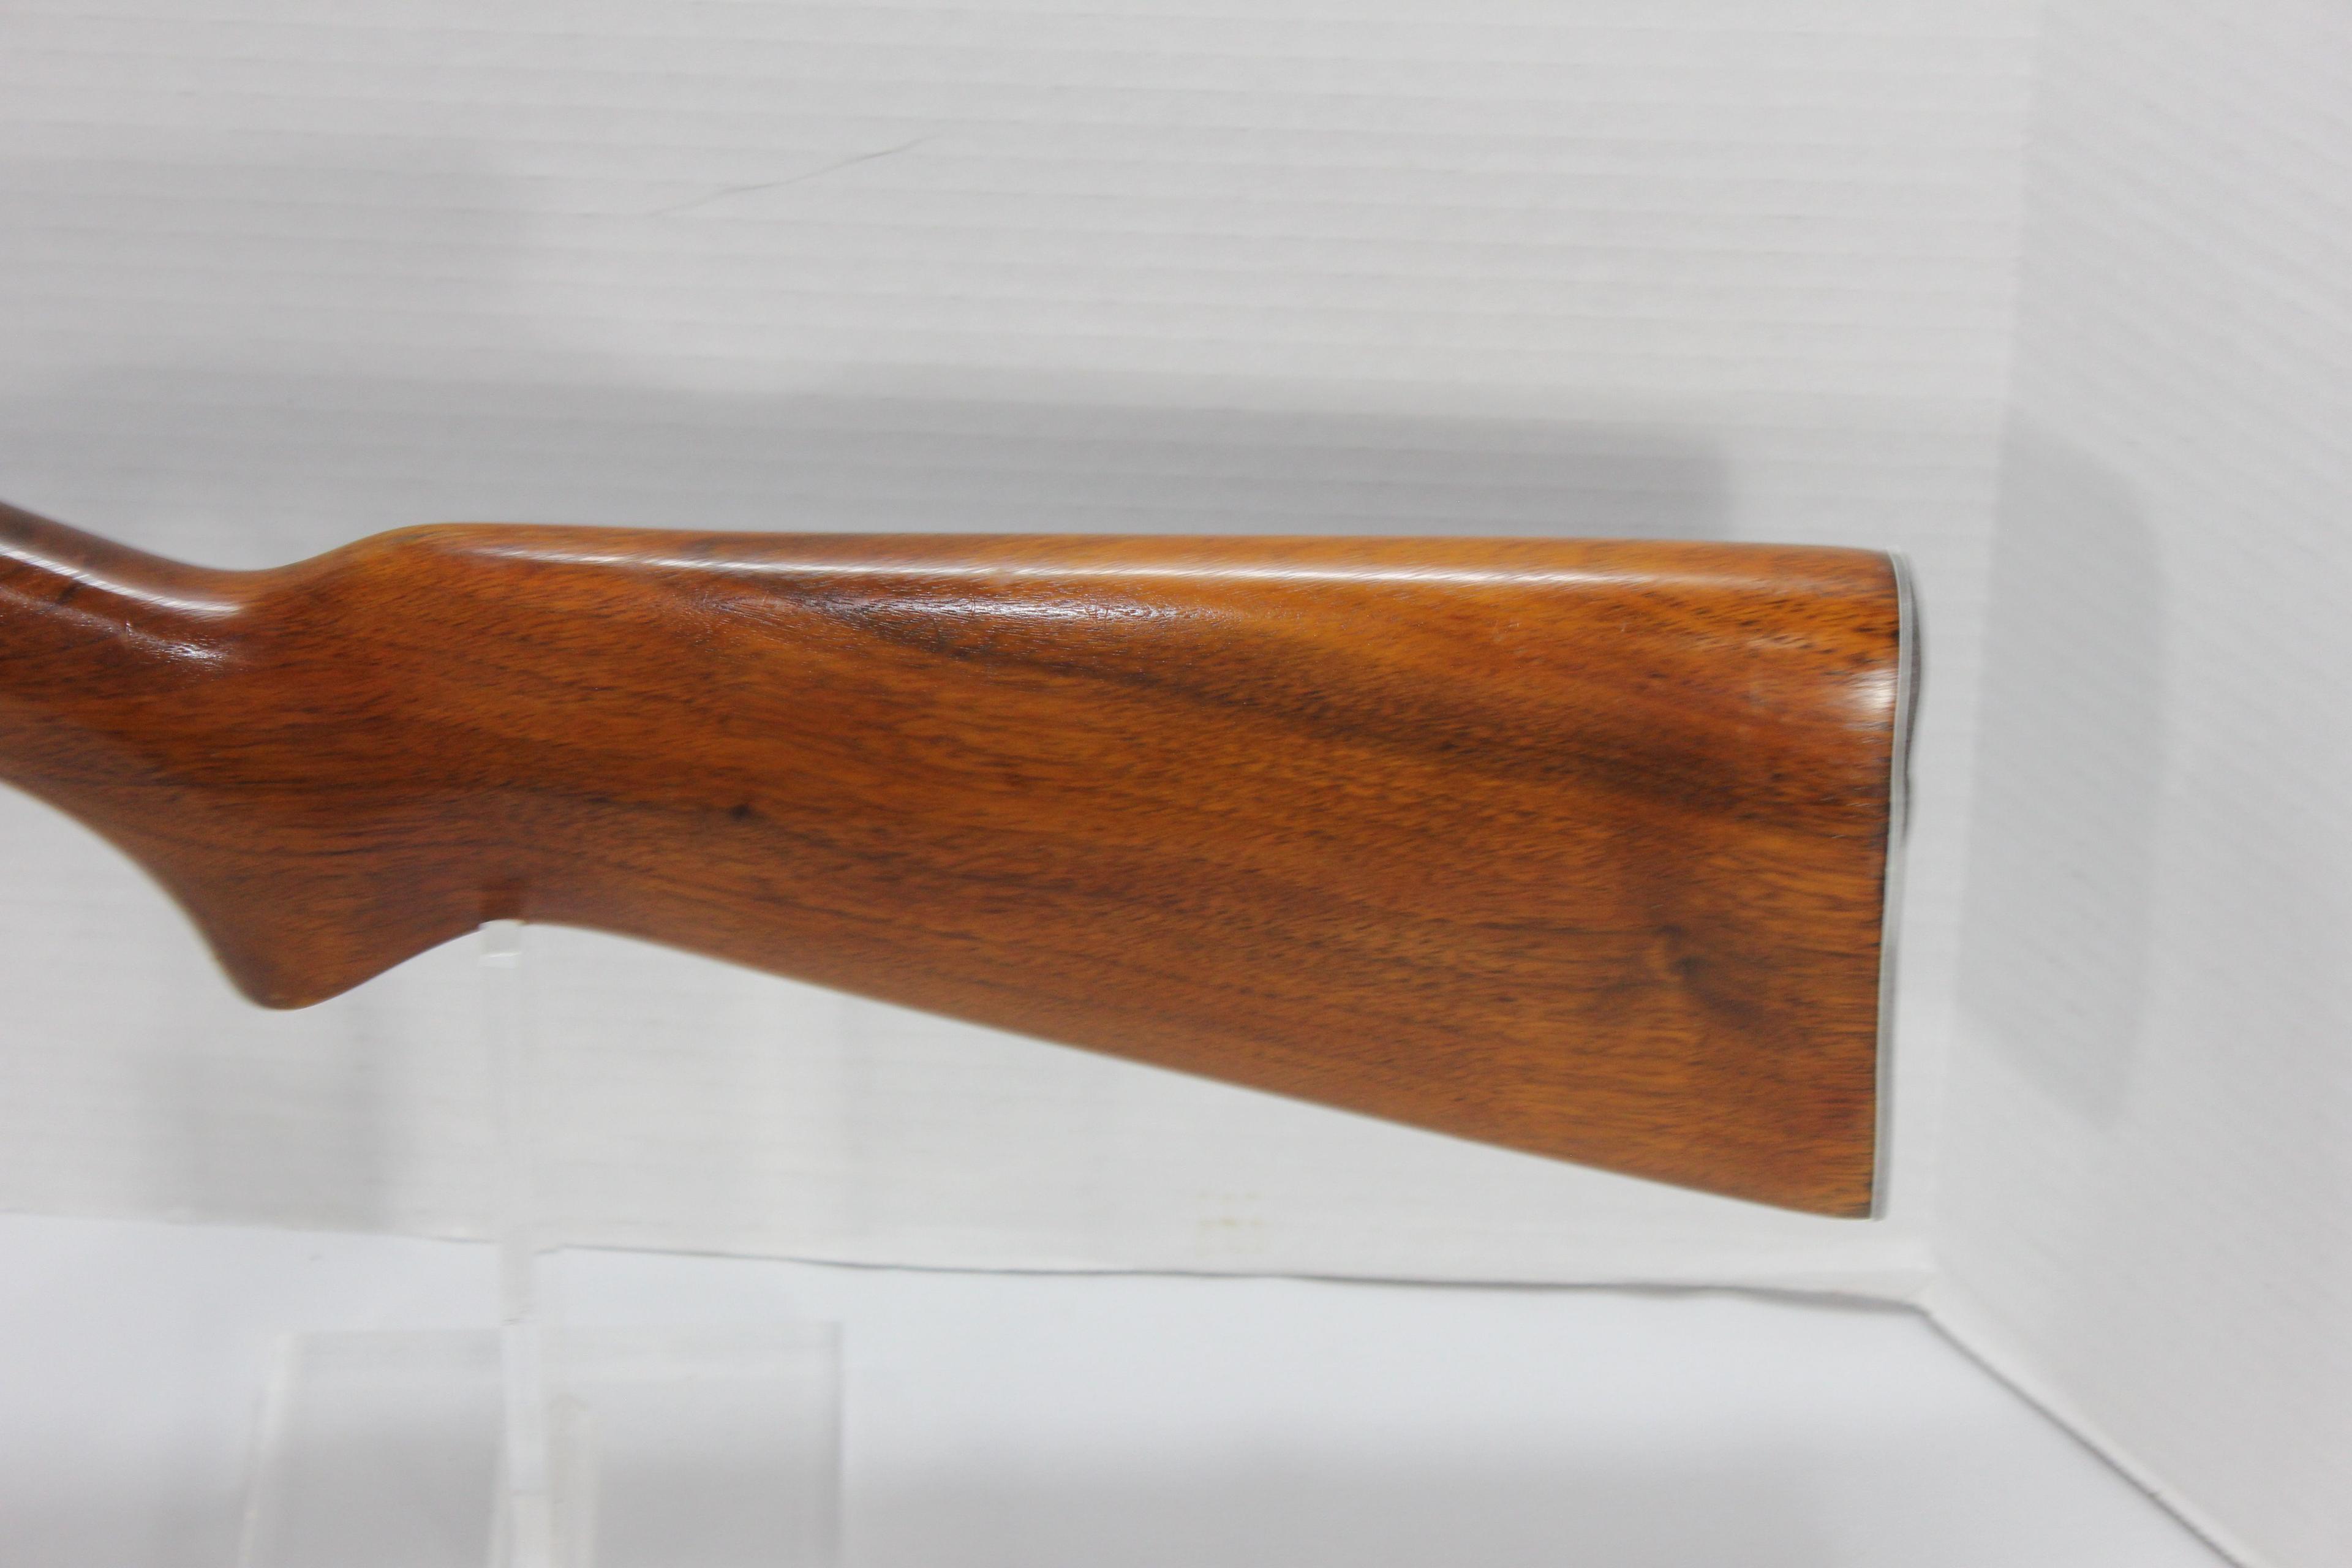 Winchester Model 74 .22LR Semi-Automatic Tube-Fed from Butt Stock Rifle; SN 118810